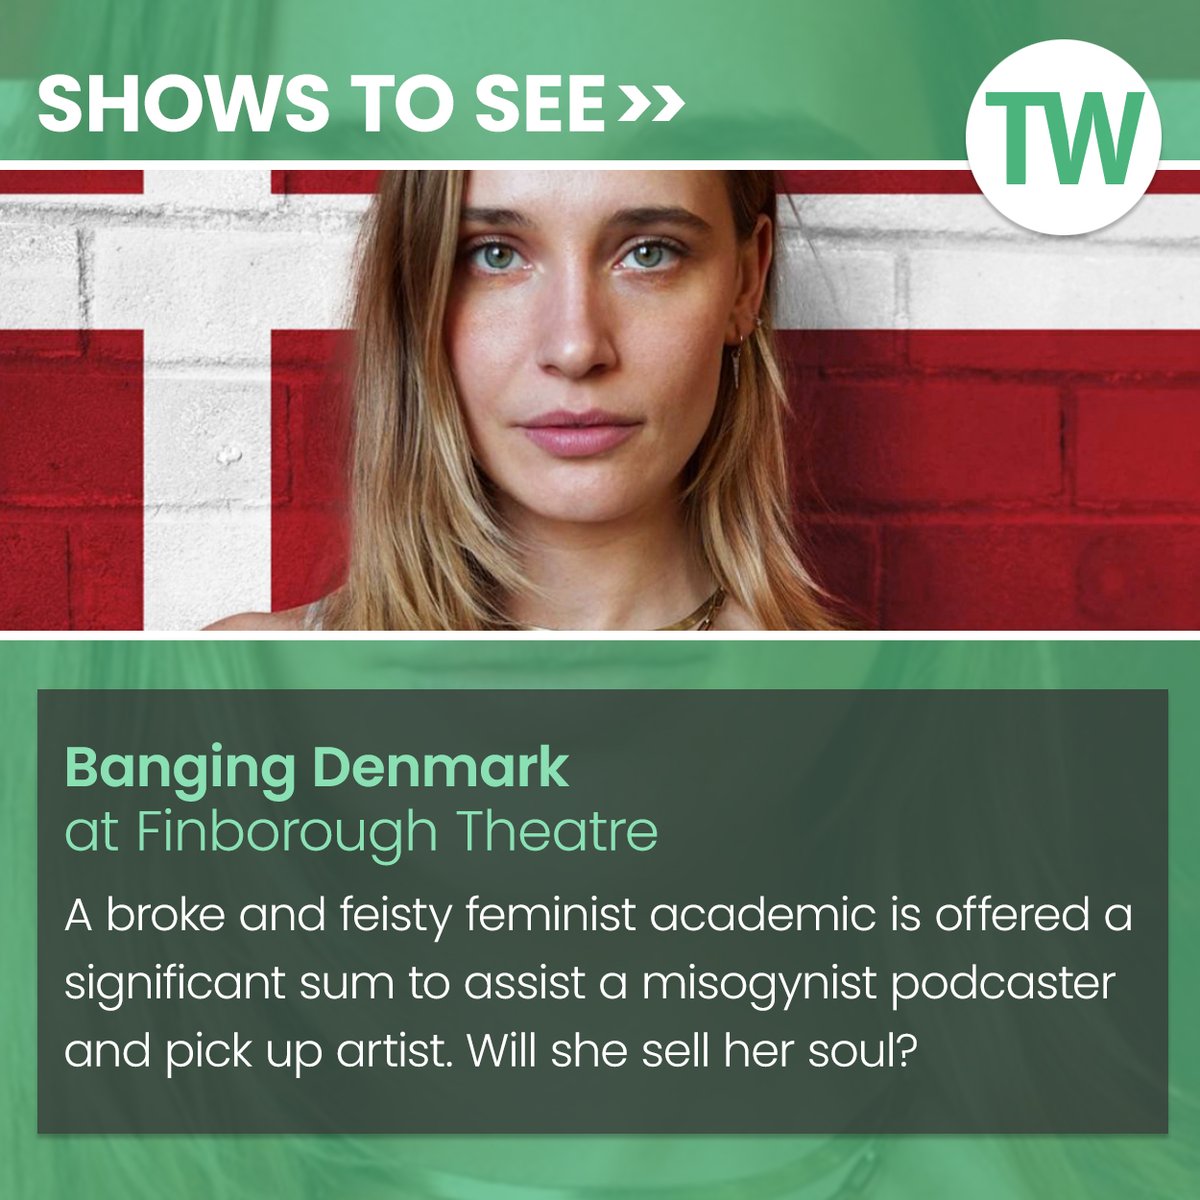 Among our recommended shows to see this week: ‘Banging Denmark’ at Finborough Theatre. Get more show tips here: bit.ly/442CiZE @finborough